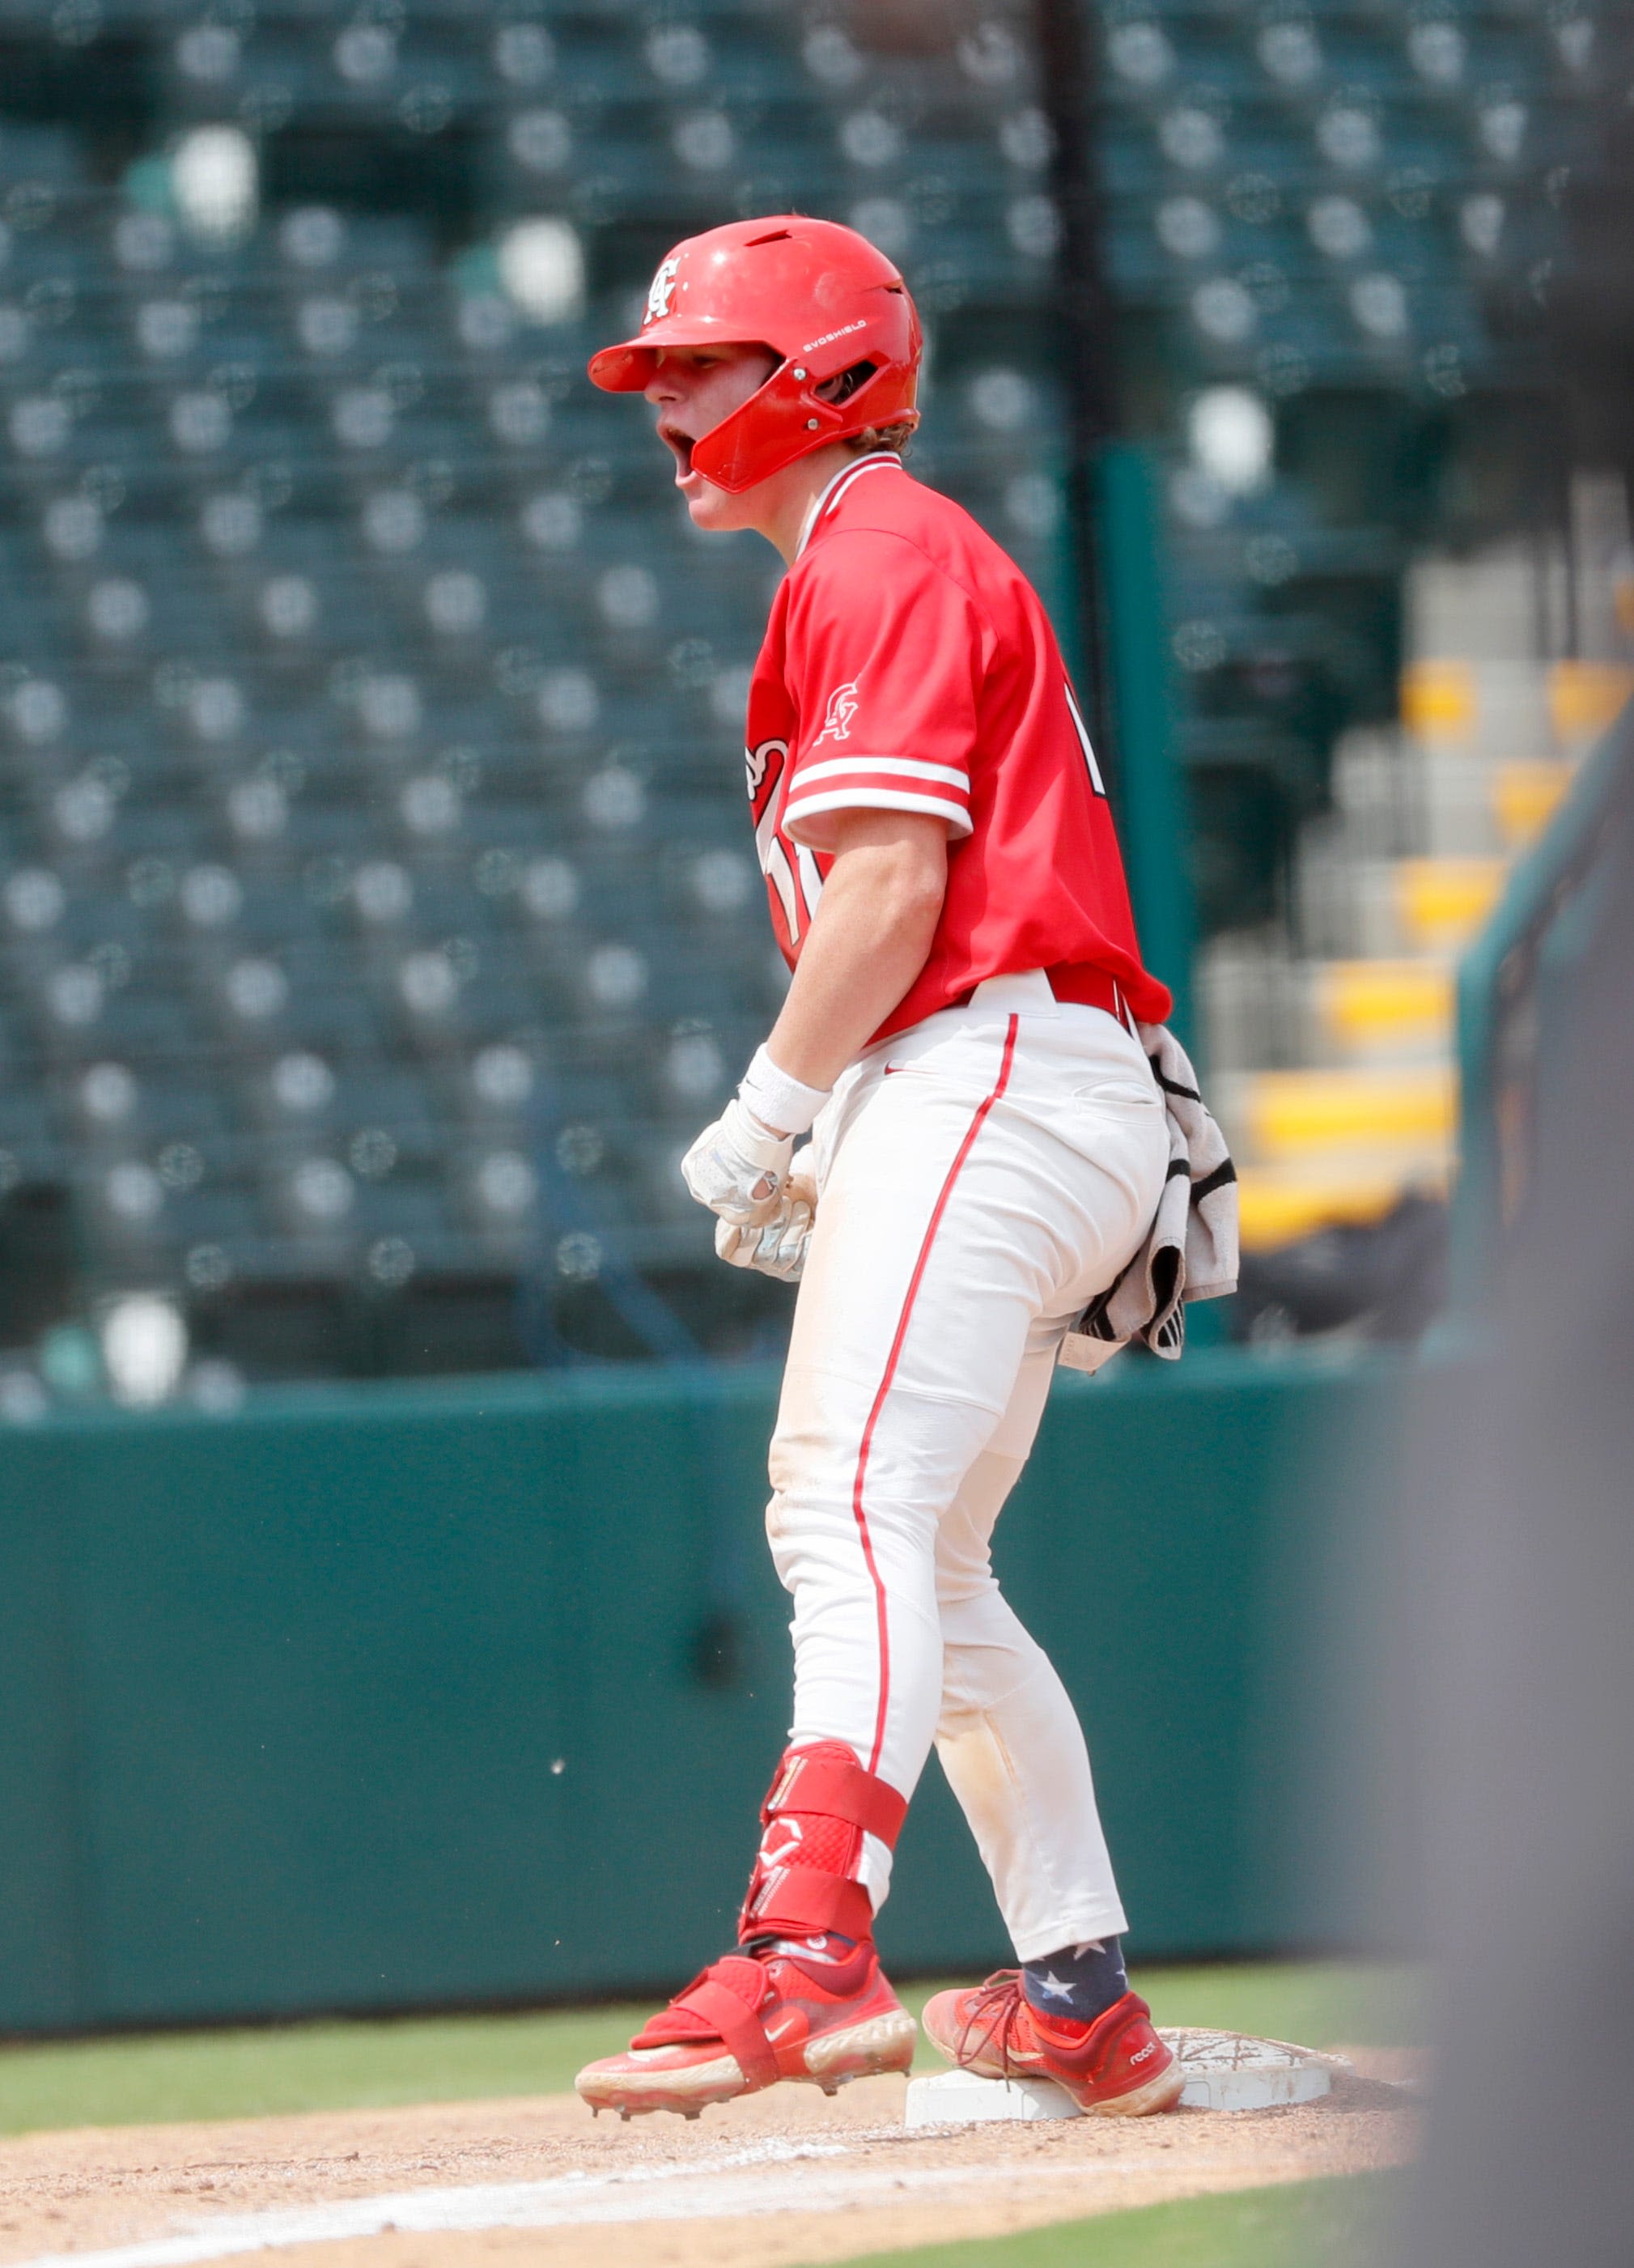 Class 5A baseball: Carl Albert defeats Duncan to repeat as state champions